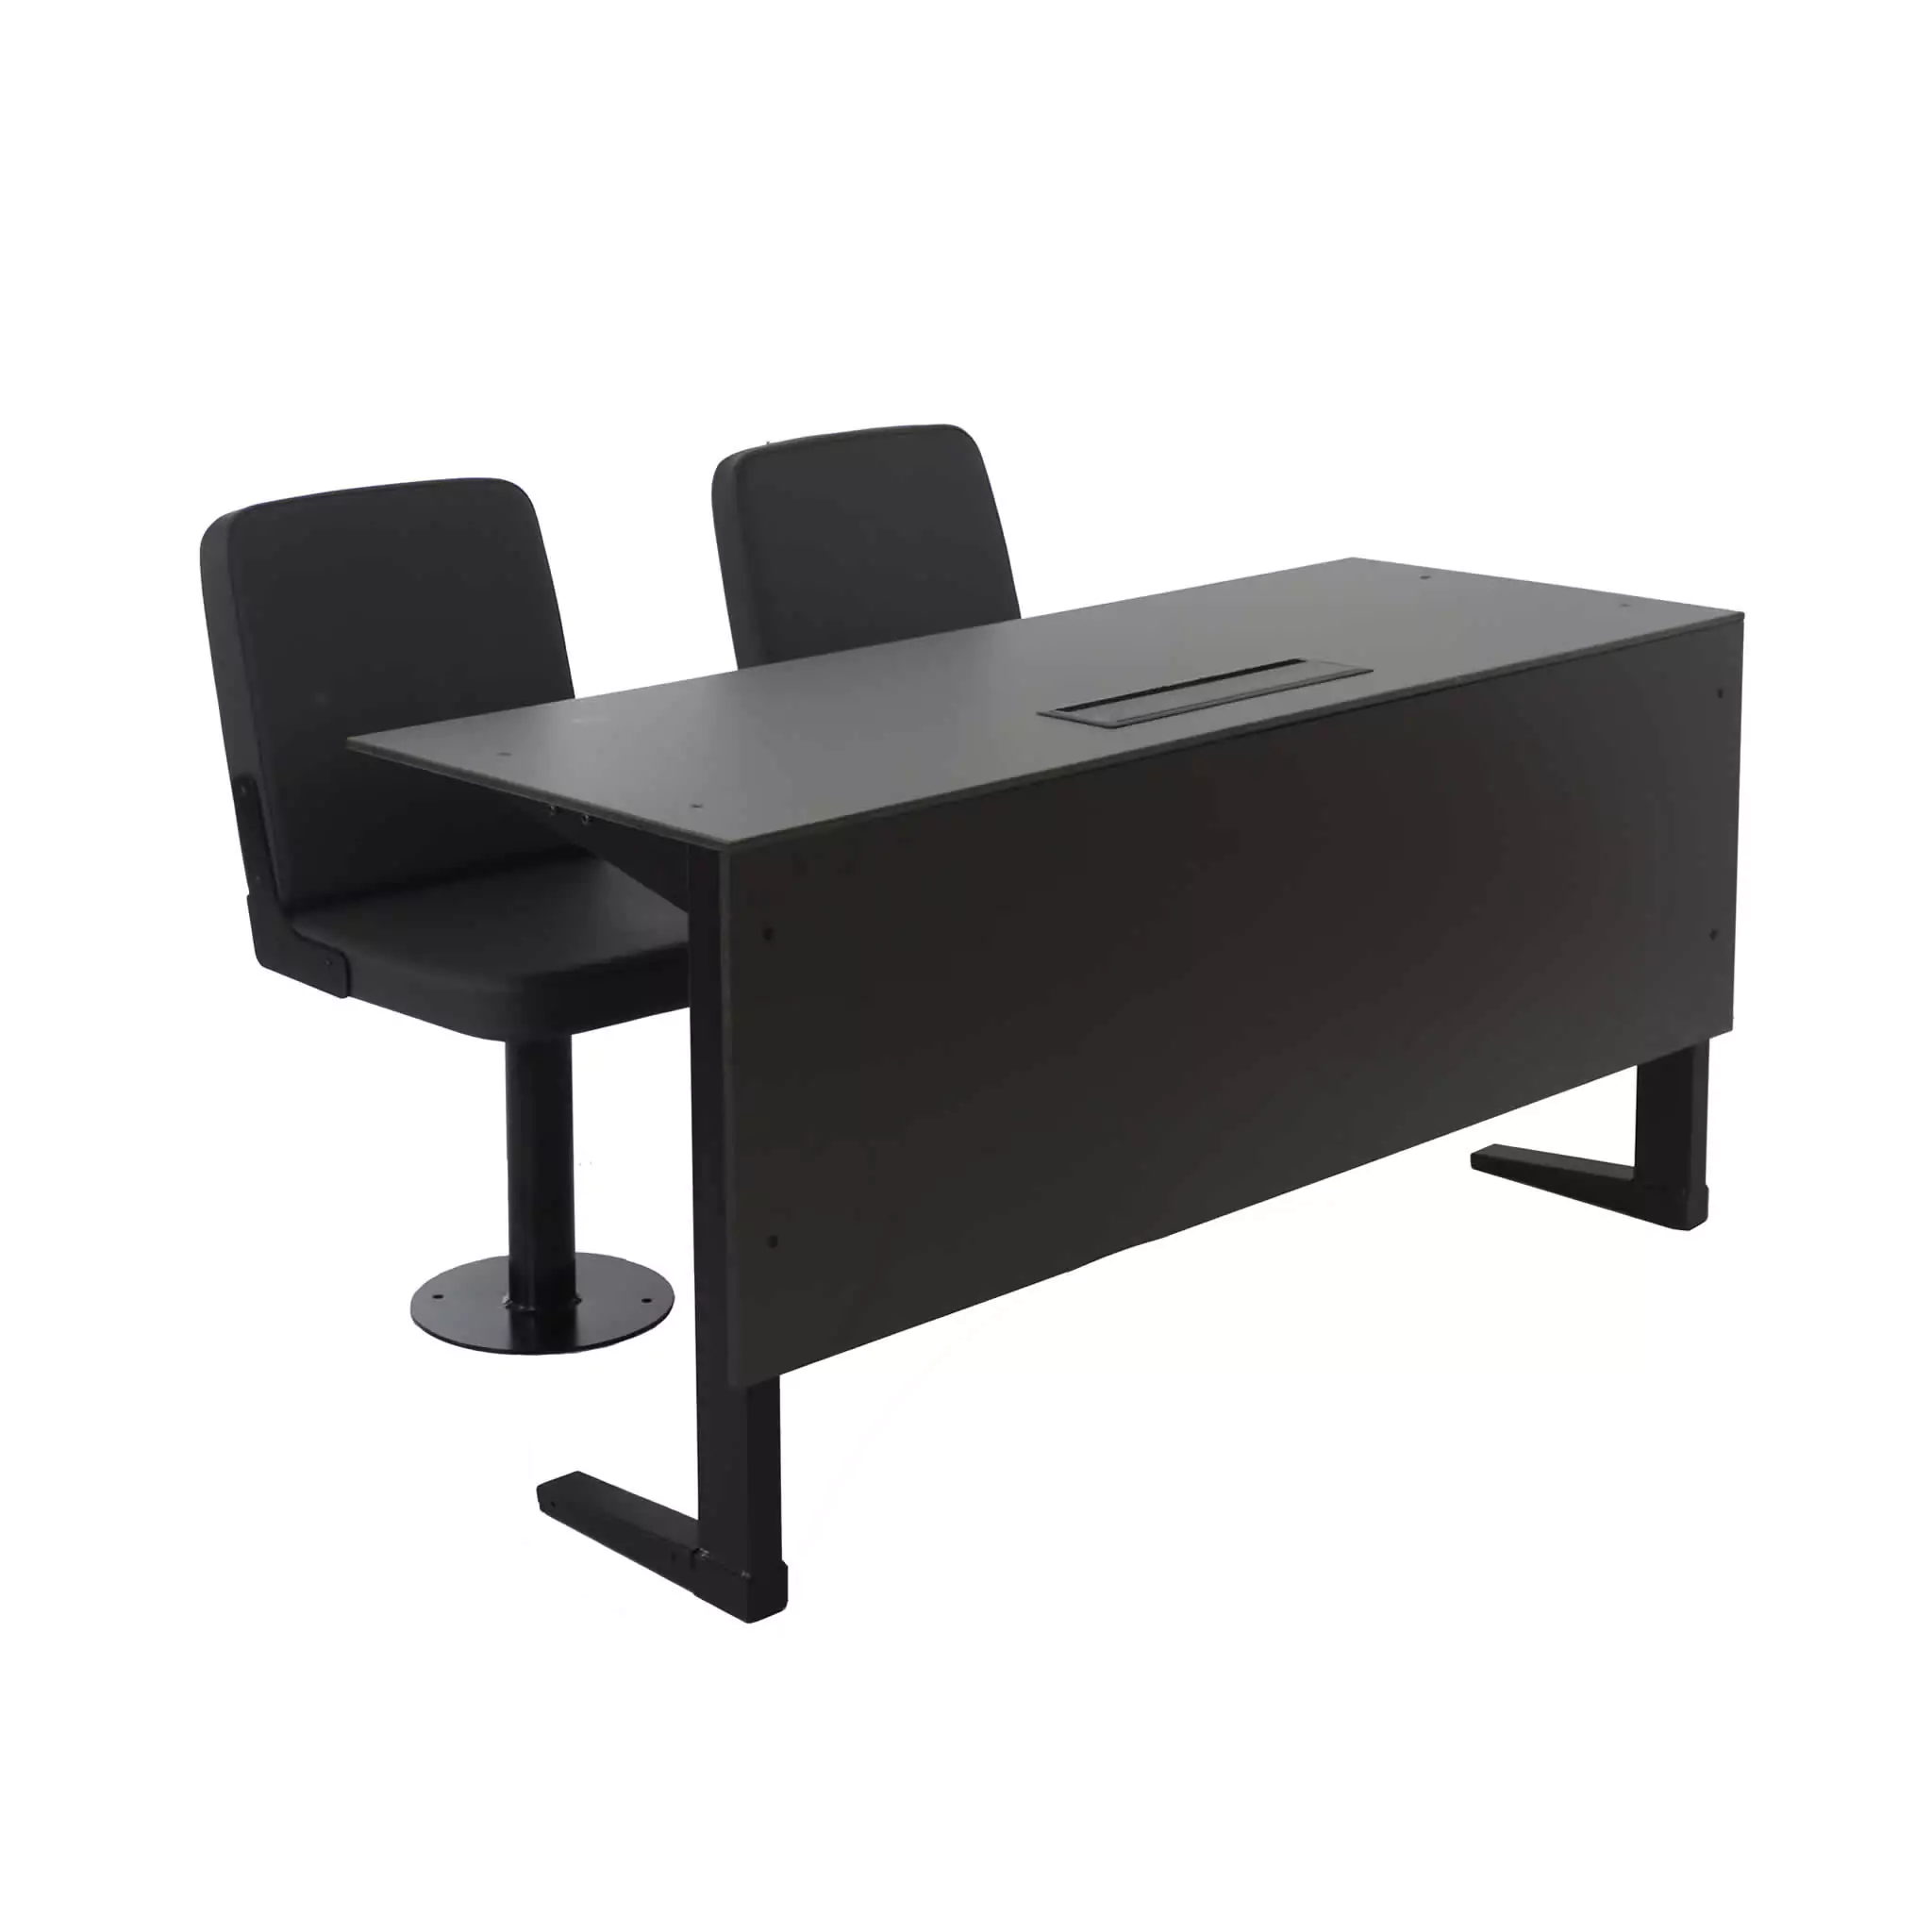 Simko Seating Products Press Table 01